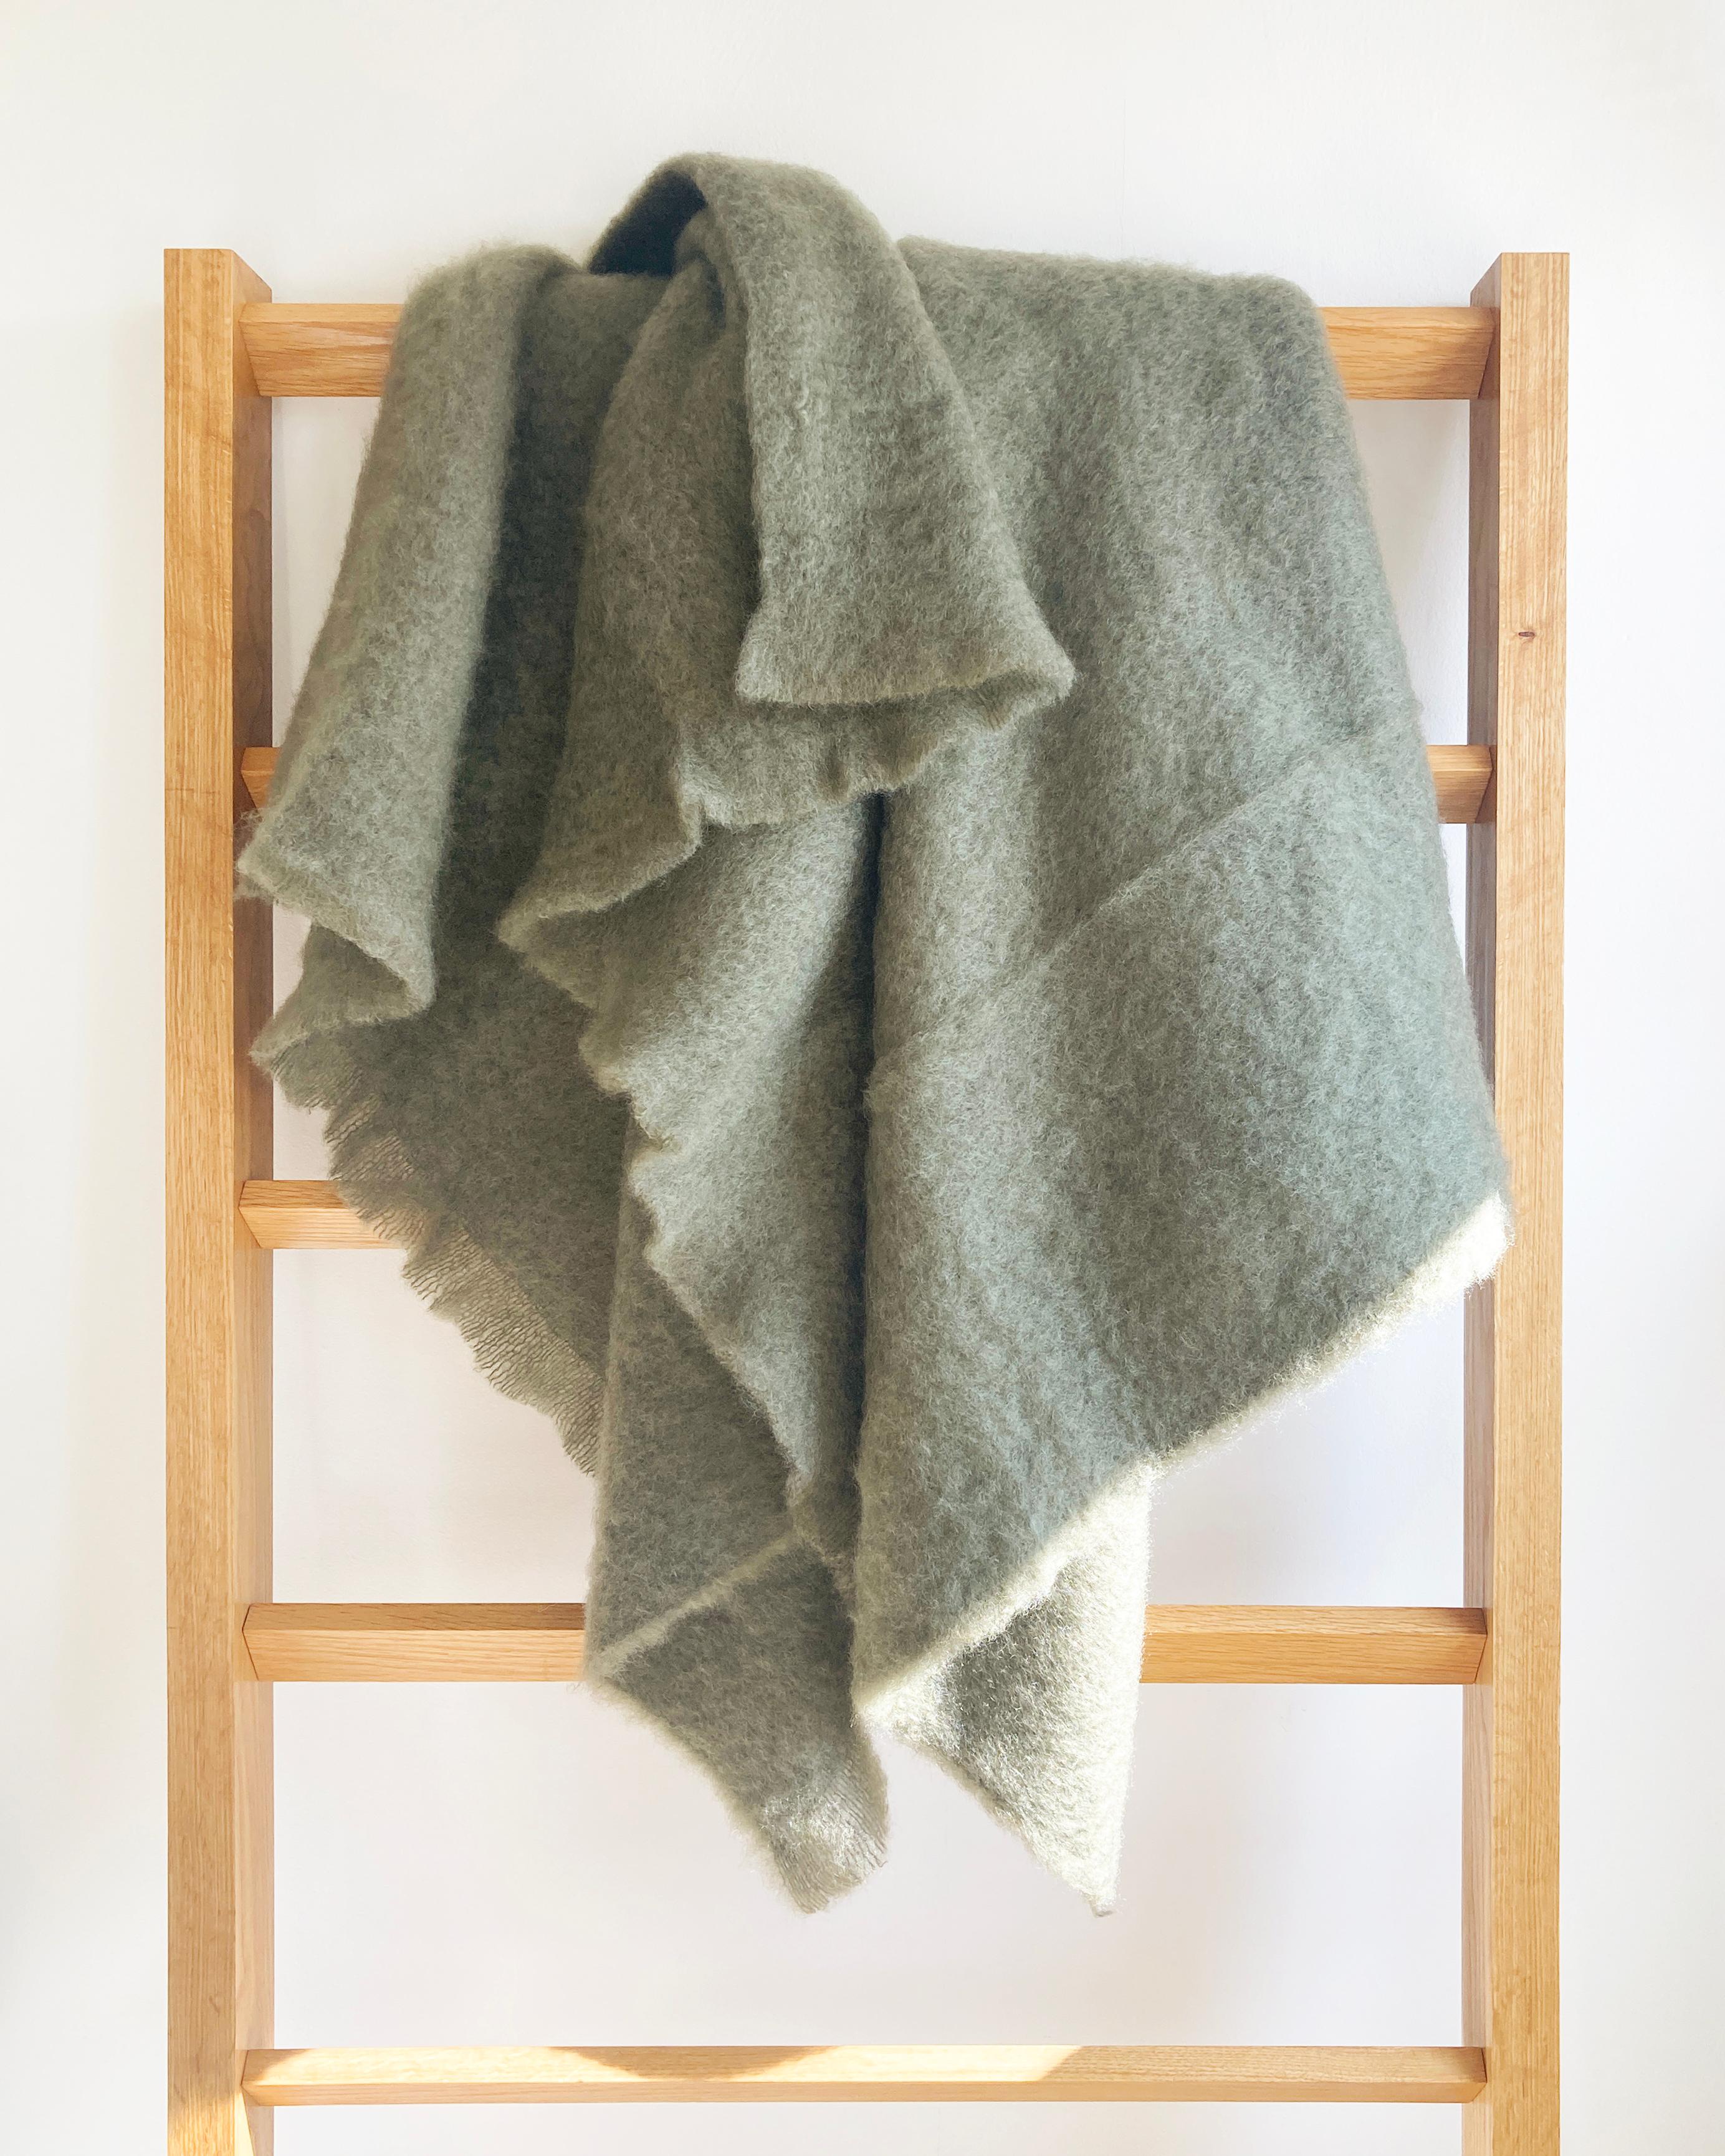 Cozy throw blankets for your home.

Mohair blankets will keep you cozy and warm this winter. When cold weather happens, wrap yourself up in this beautiful Moss green Mohair Throw and stay cozy. This understated green color will light up the room